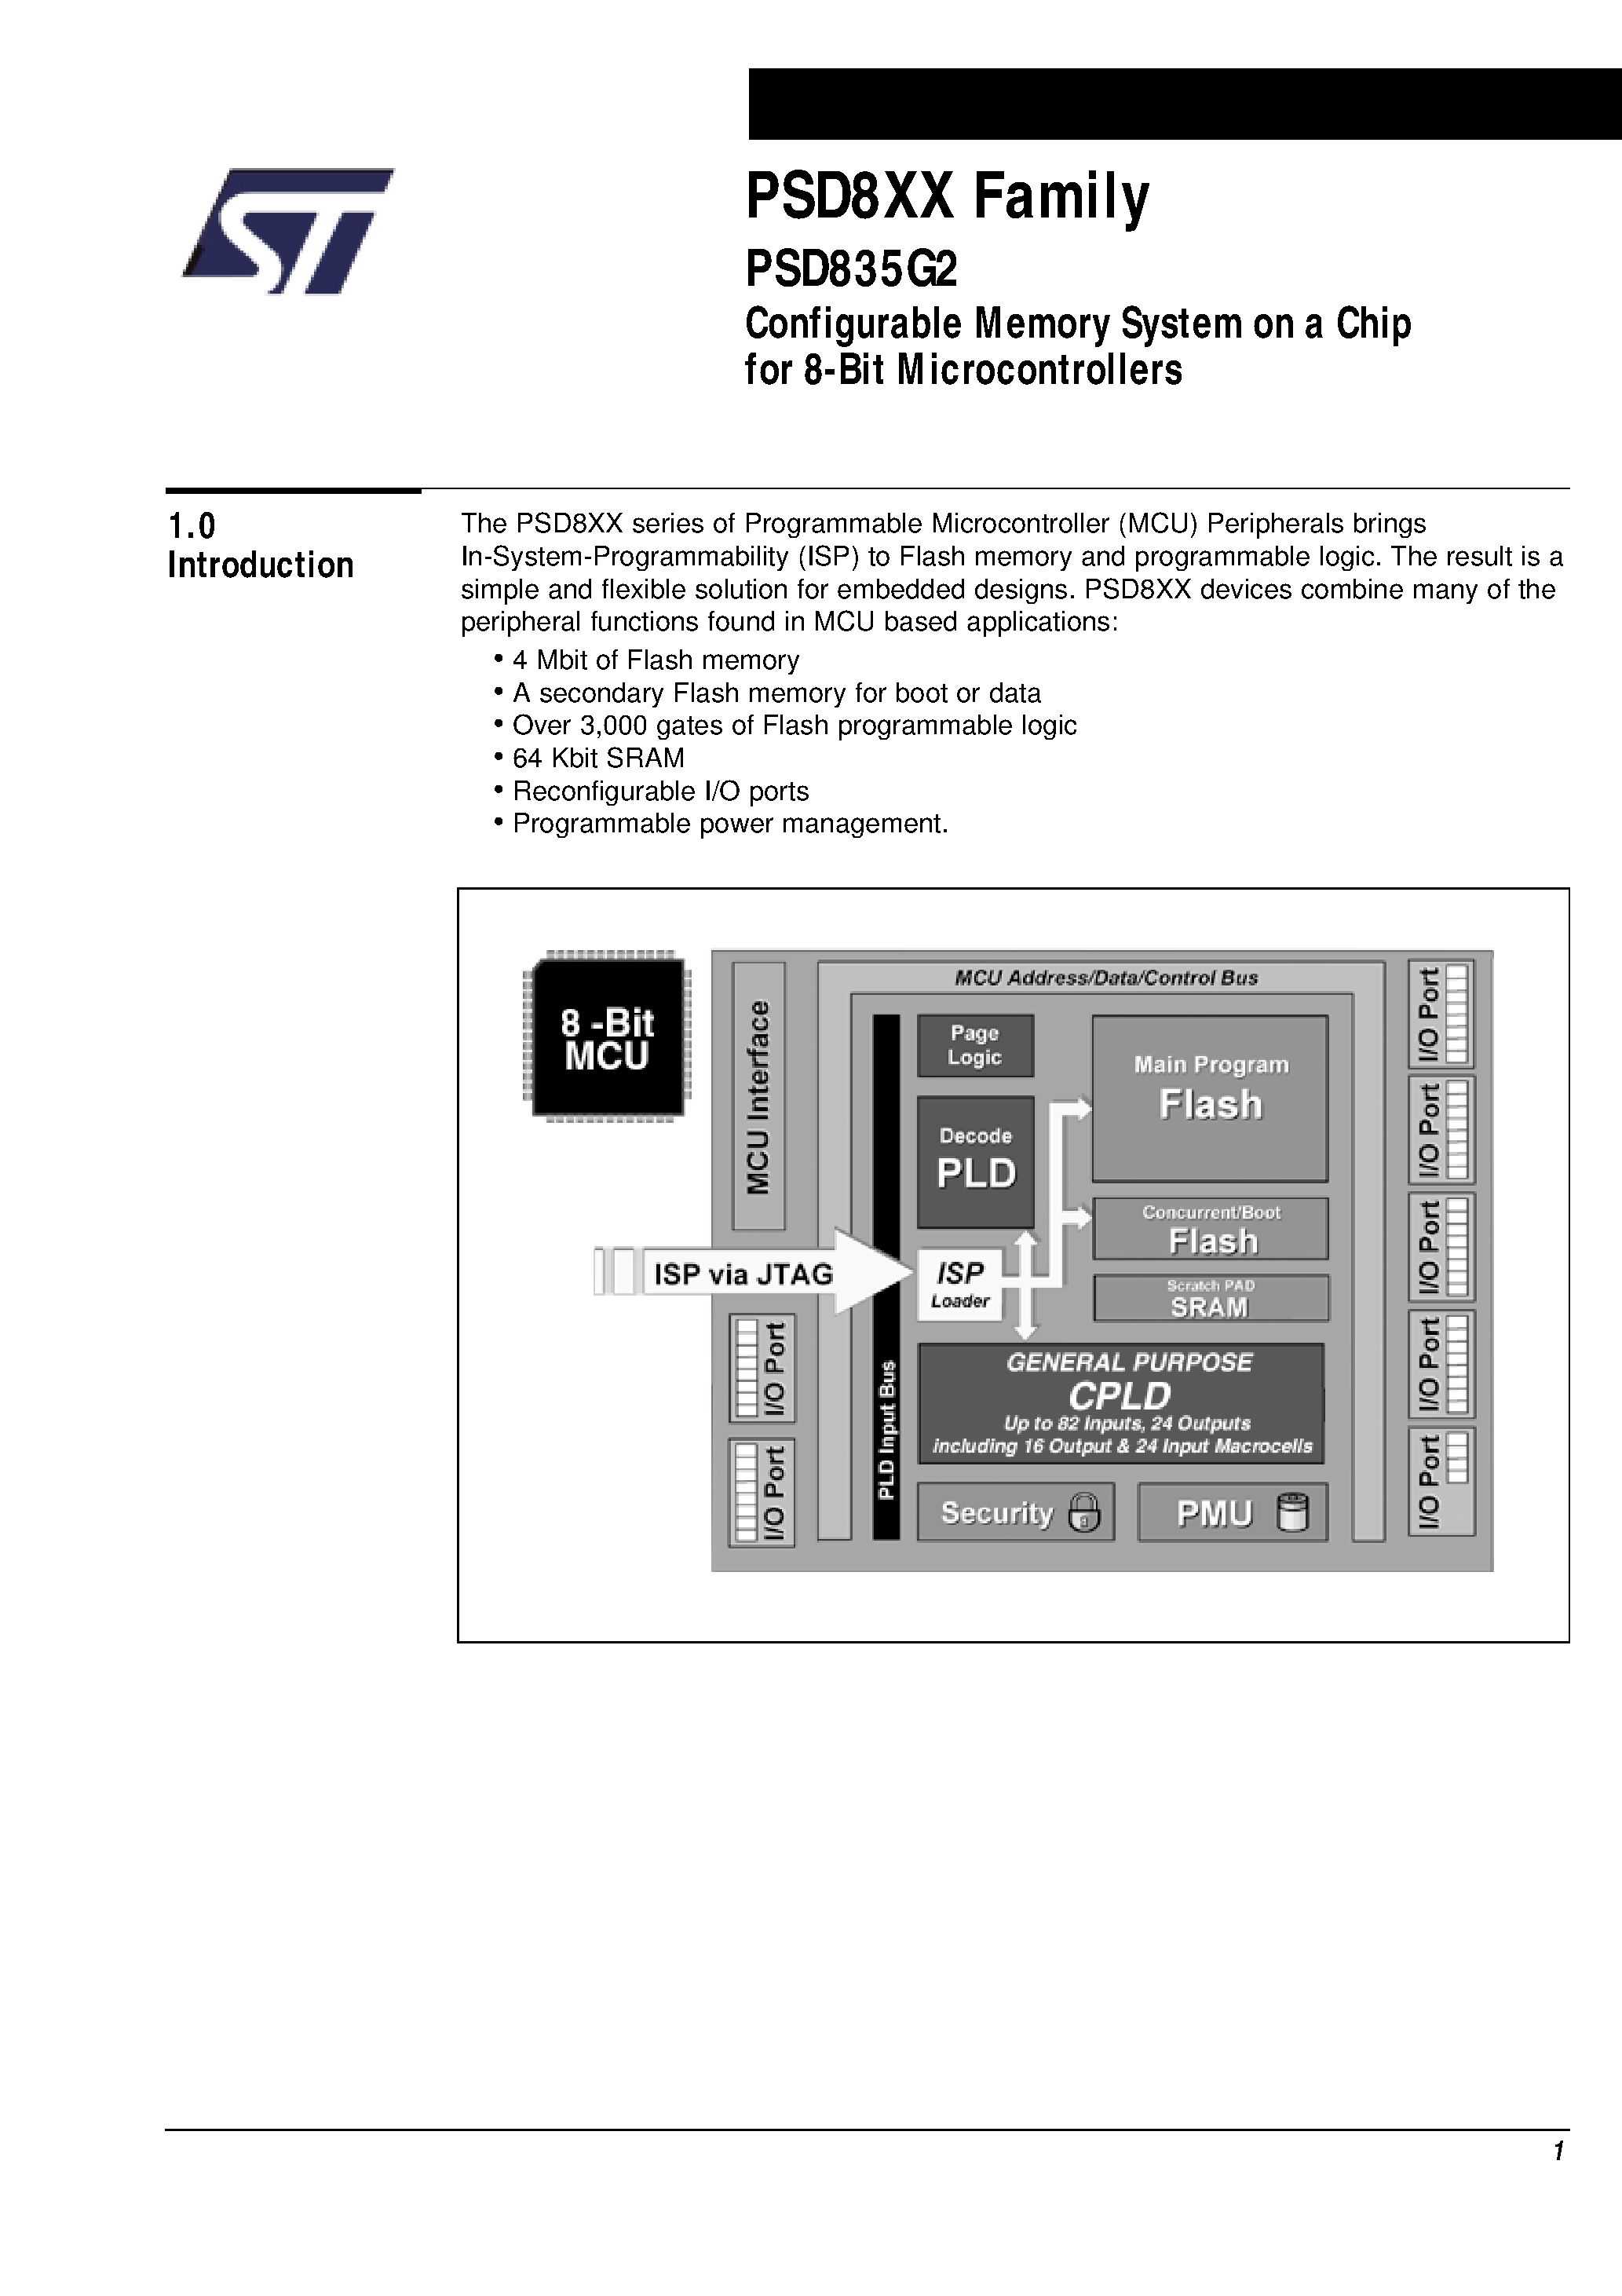 Datasheet PSD835F1V-A-12M - Configurable Memory System on a Chip for 8-Bit Microcontrollers page 2